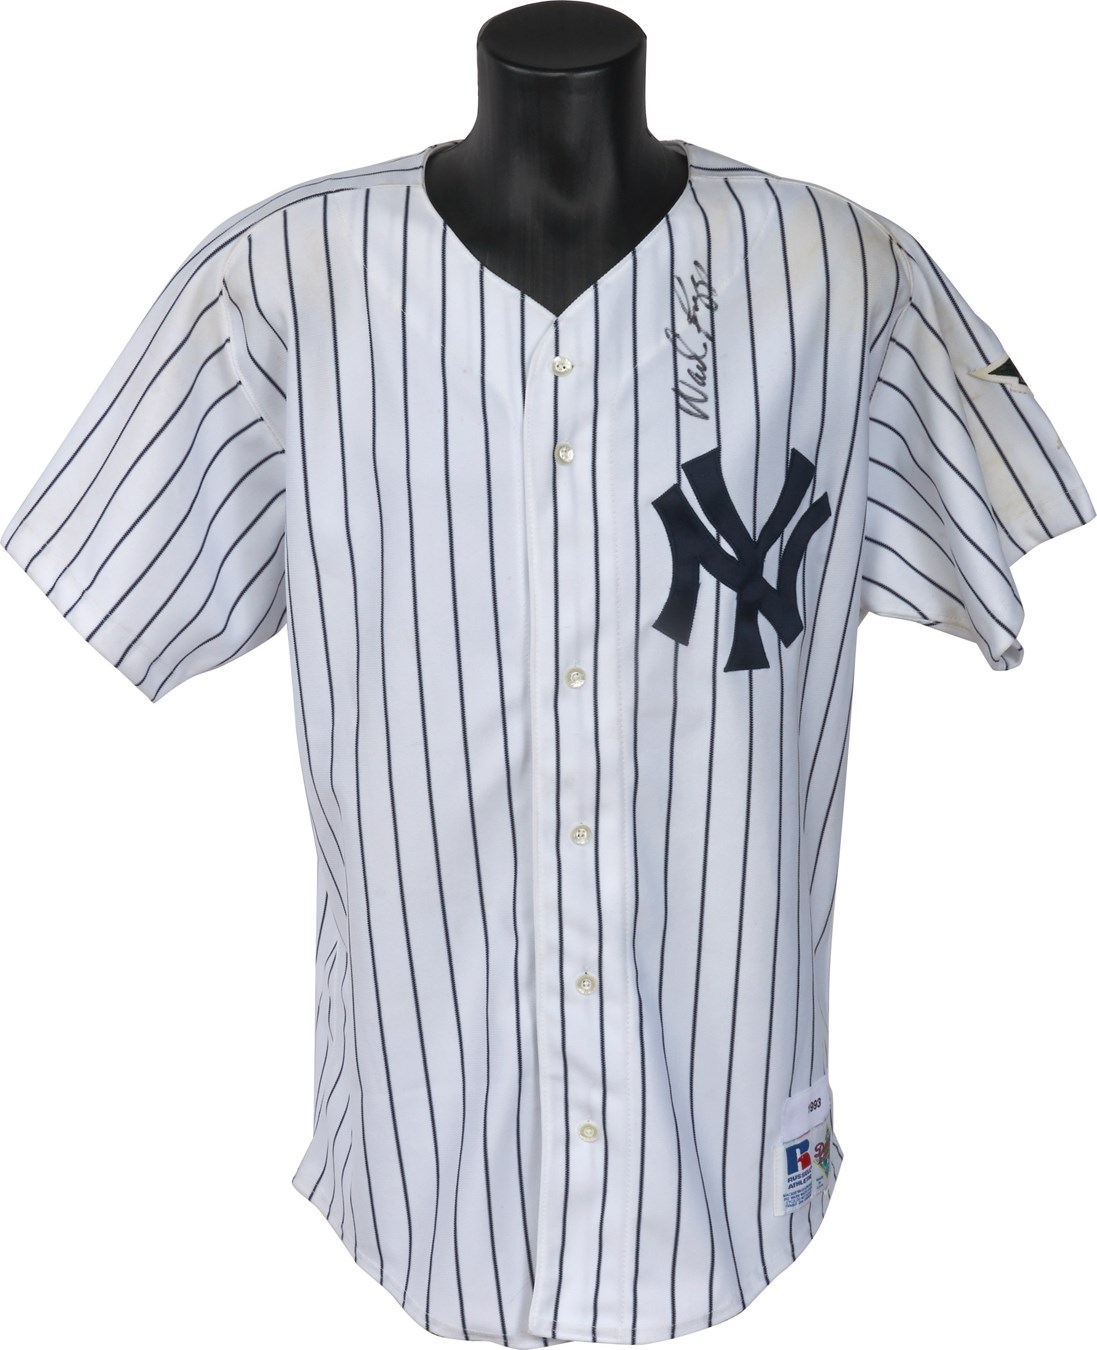 - 1993 Wade Boggs New York Yankees All-Star Game Worn Jersey (Photomatched)